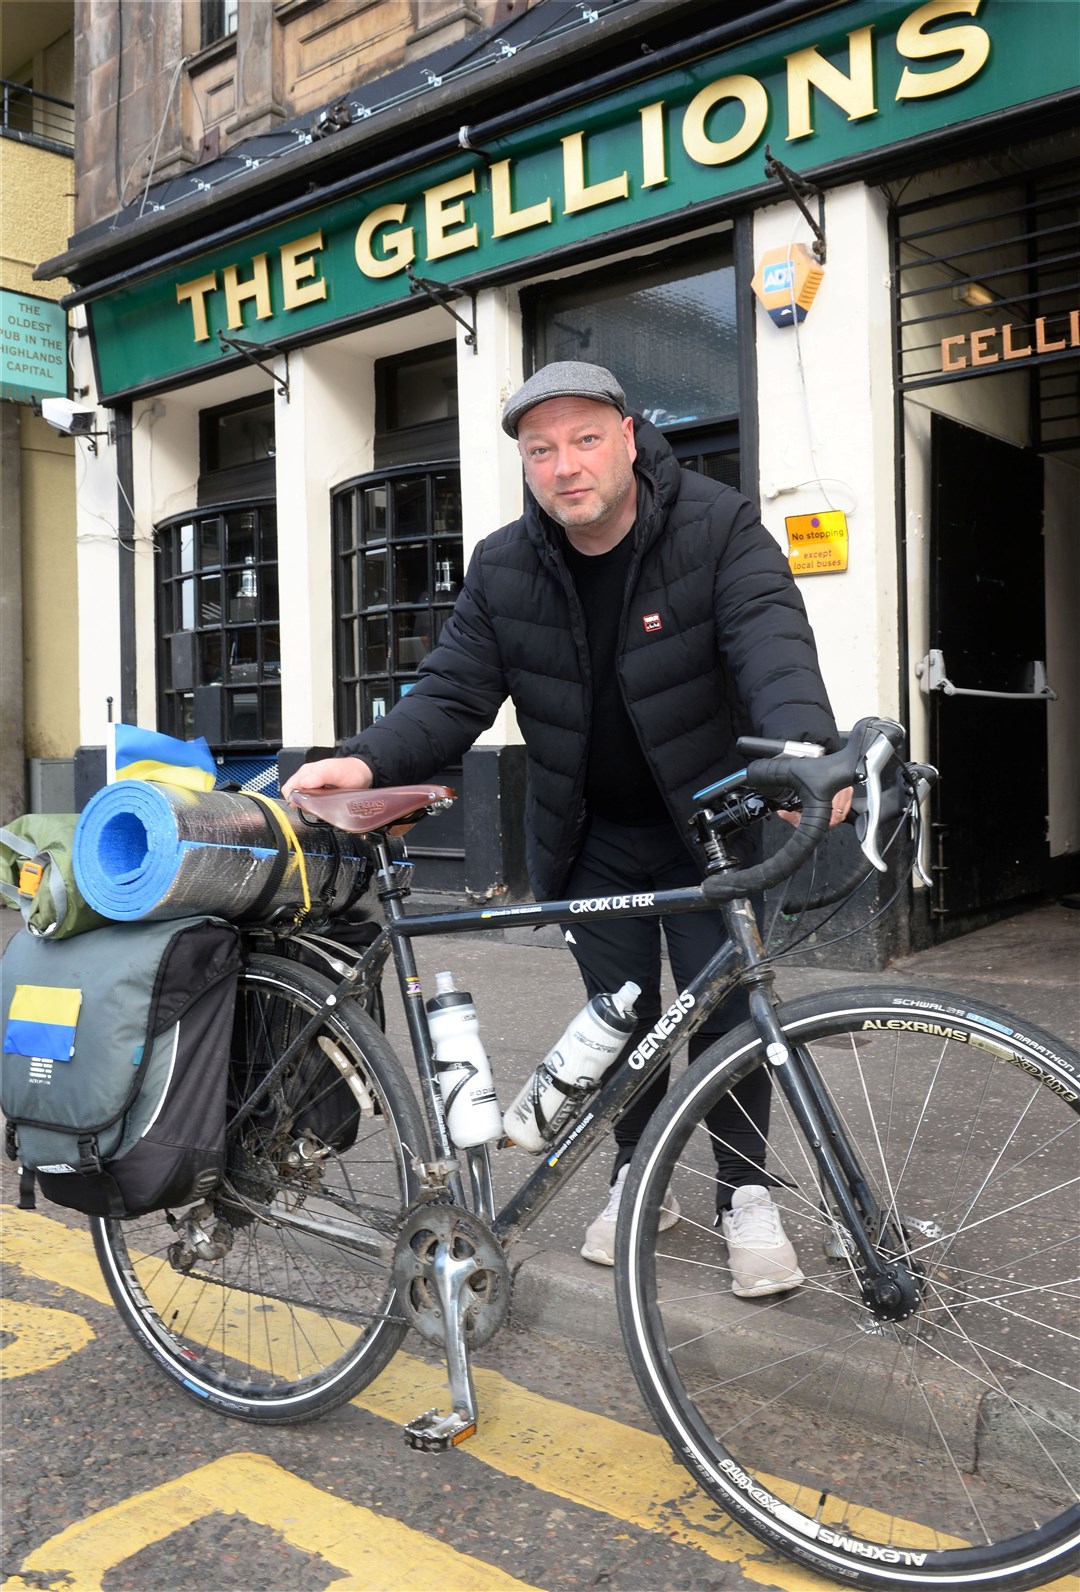 Alasdair Fraser before he set off for his Gdansk to The Gellions fundraising cycle ride for Urkraine. Picture: Gary Anthony